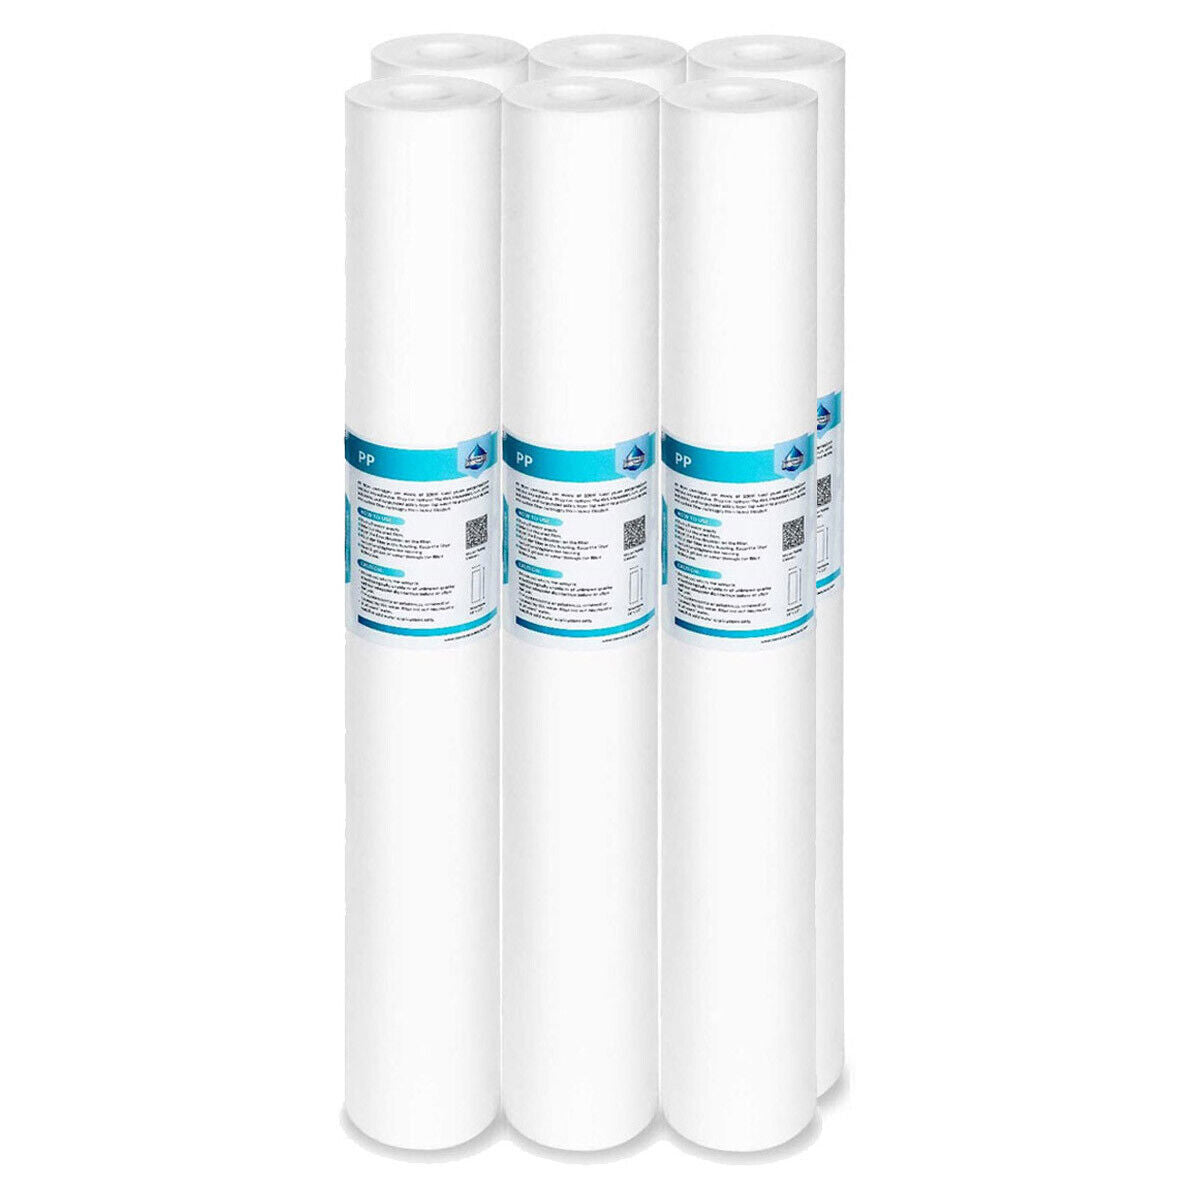 Membrane Solutions 20" x 2.5" Polypropylene PP Sediment Water Filter Replacement Cartridge for Whole House Filter System